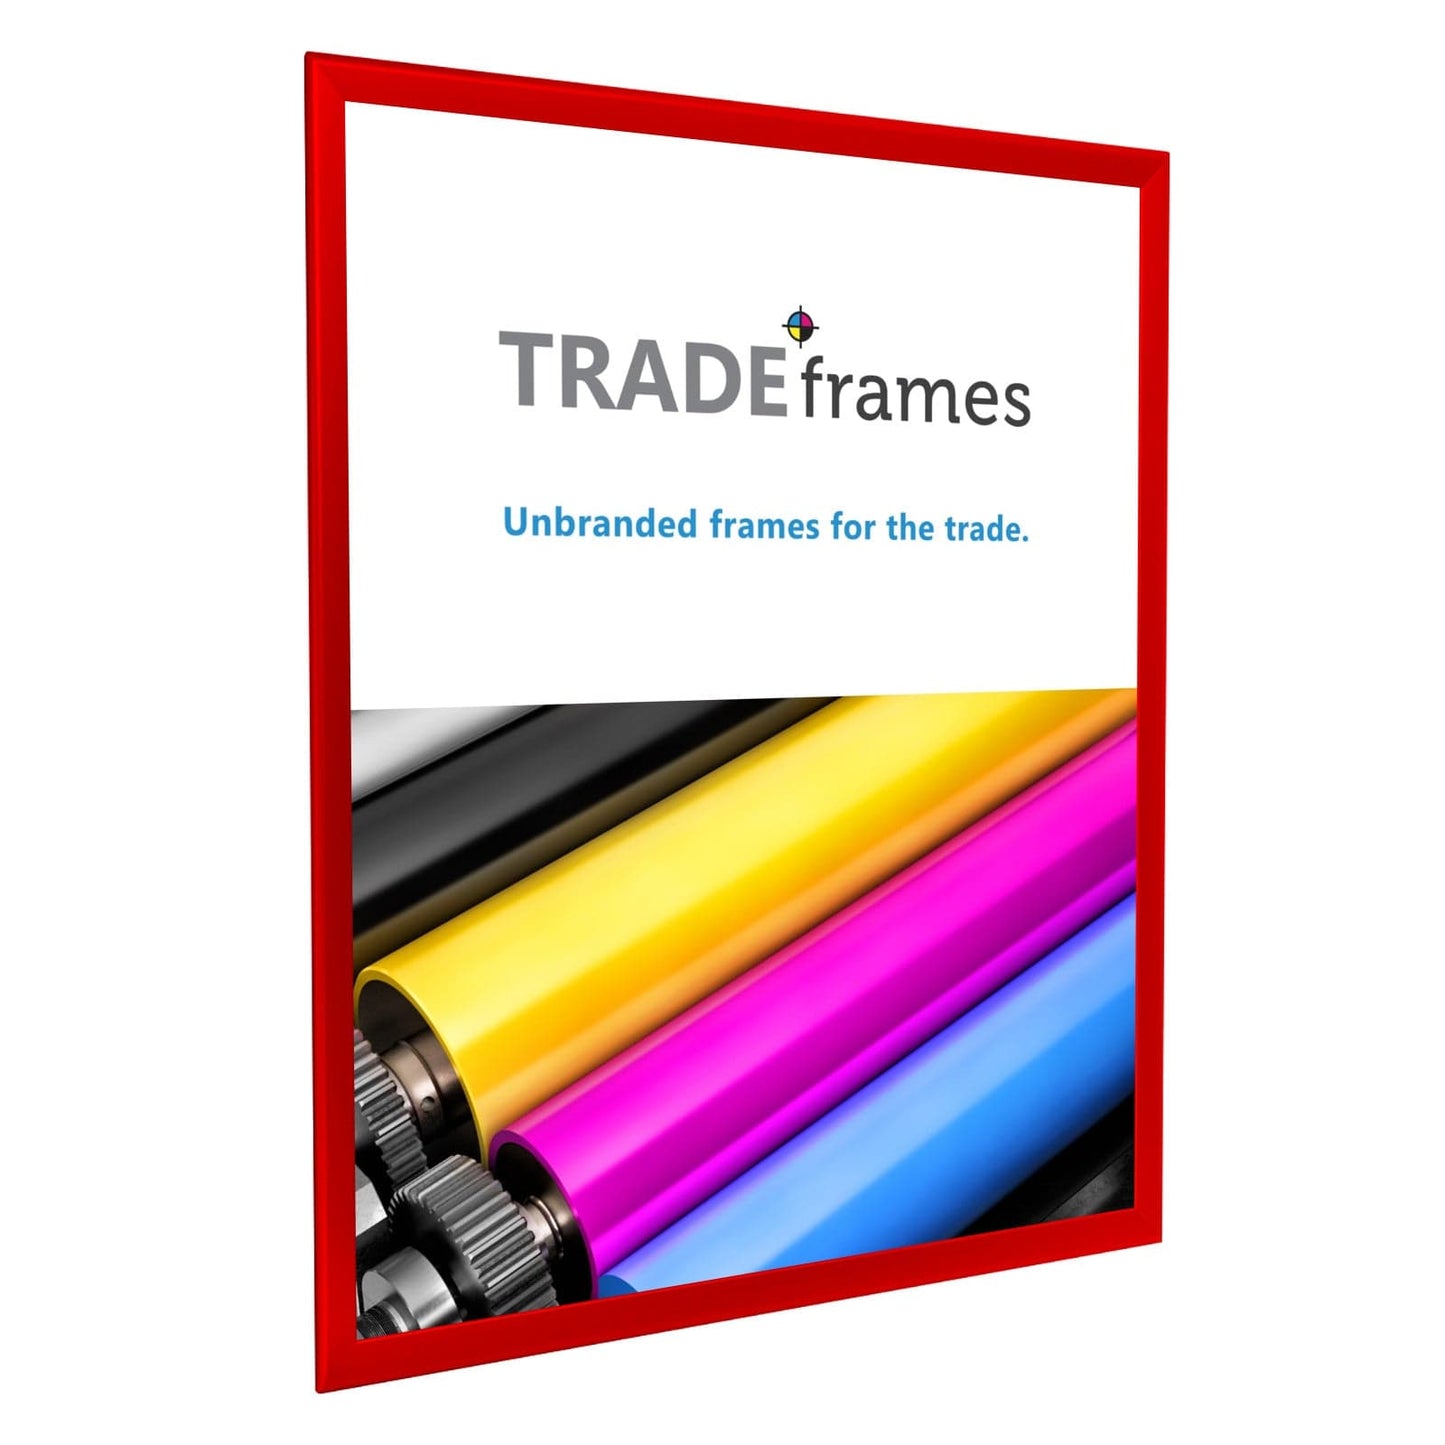 30x40  TRADEframe Red Snap Frame 30x40 - 1.25 inch profile - Snap Frames Direct